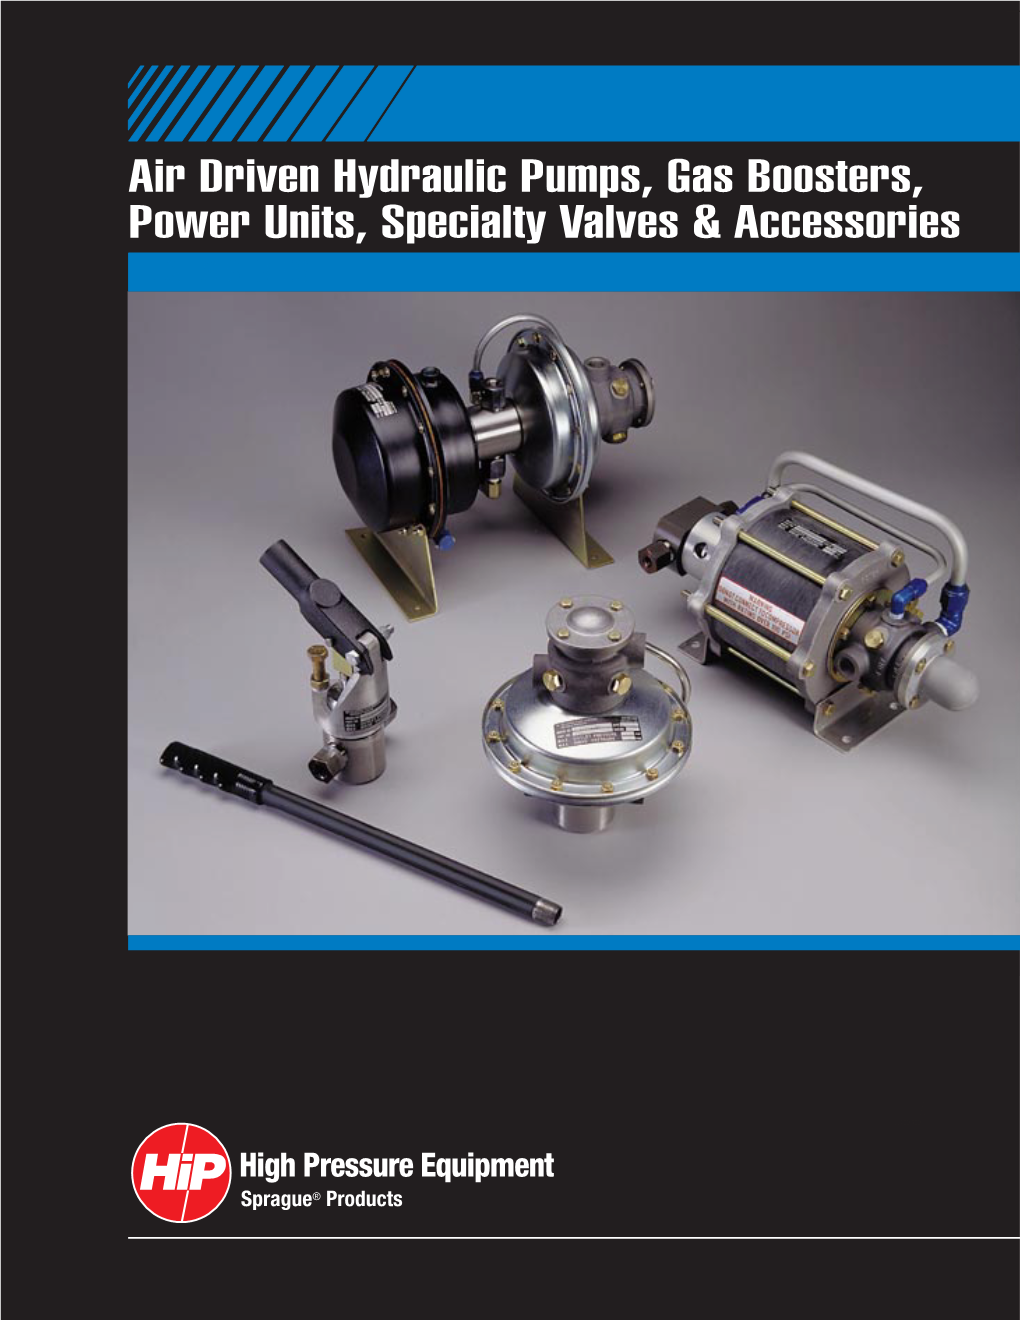 Air Driven Hydraulic Pumps, Gas Boosters, Power Units, Specialty Valves & Accessories